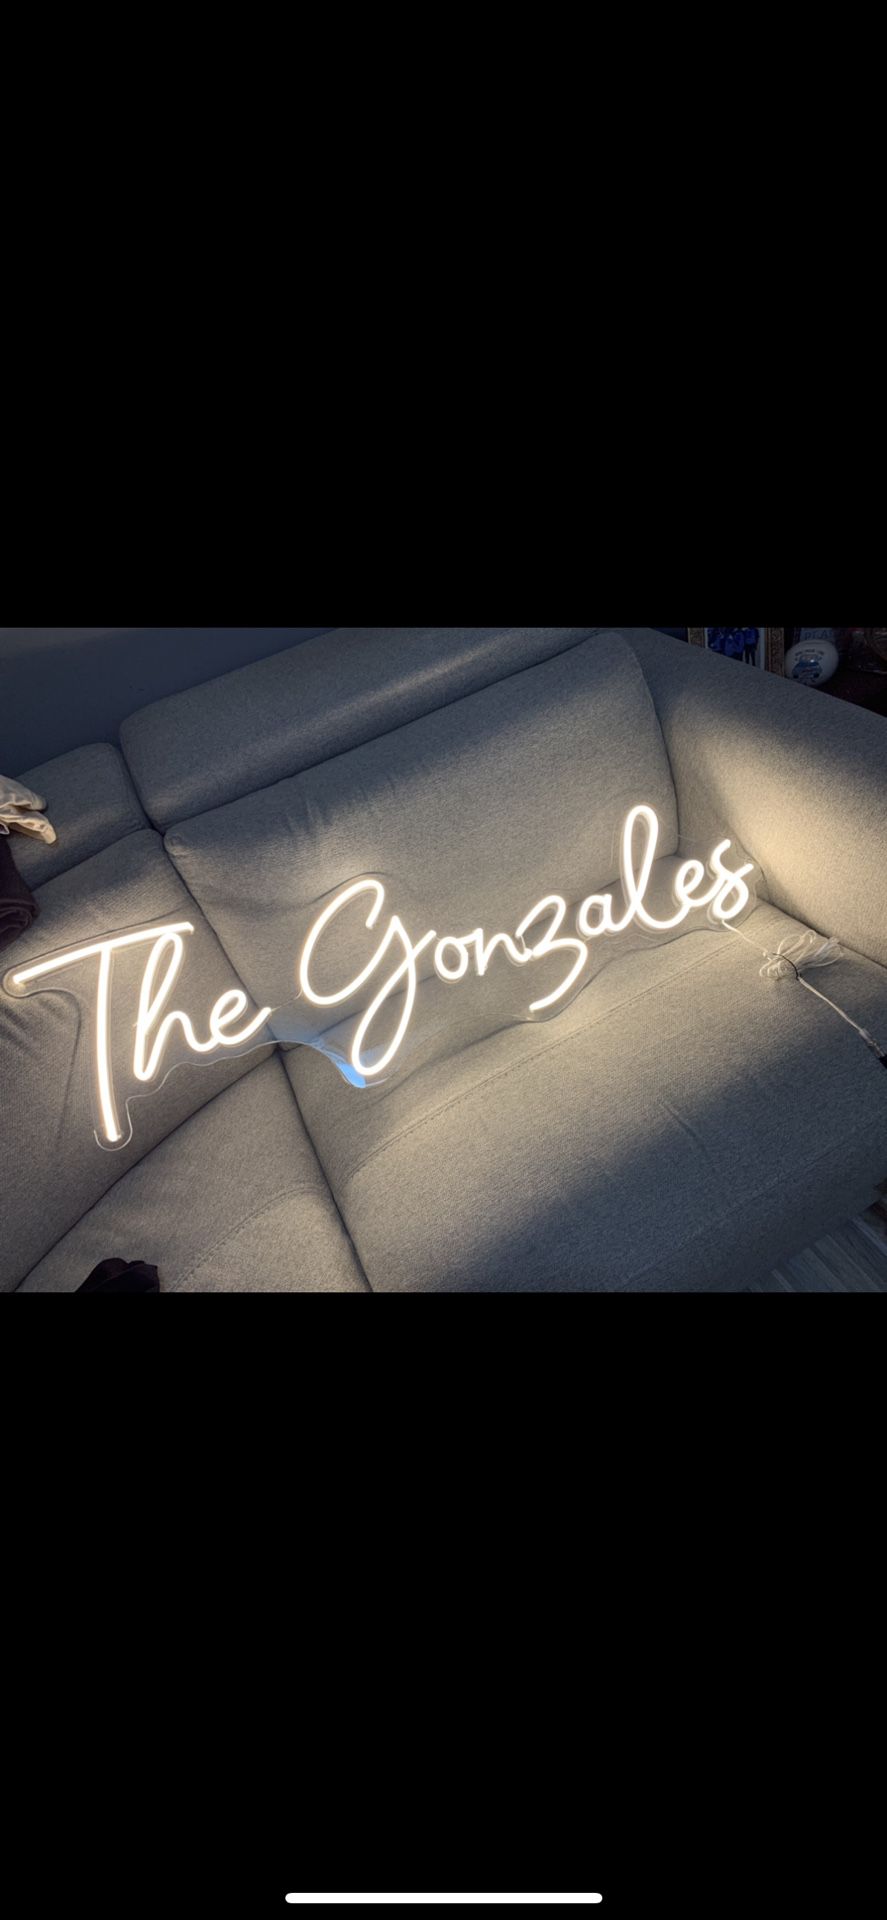 “The gonzales” Neon Sign 